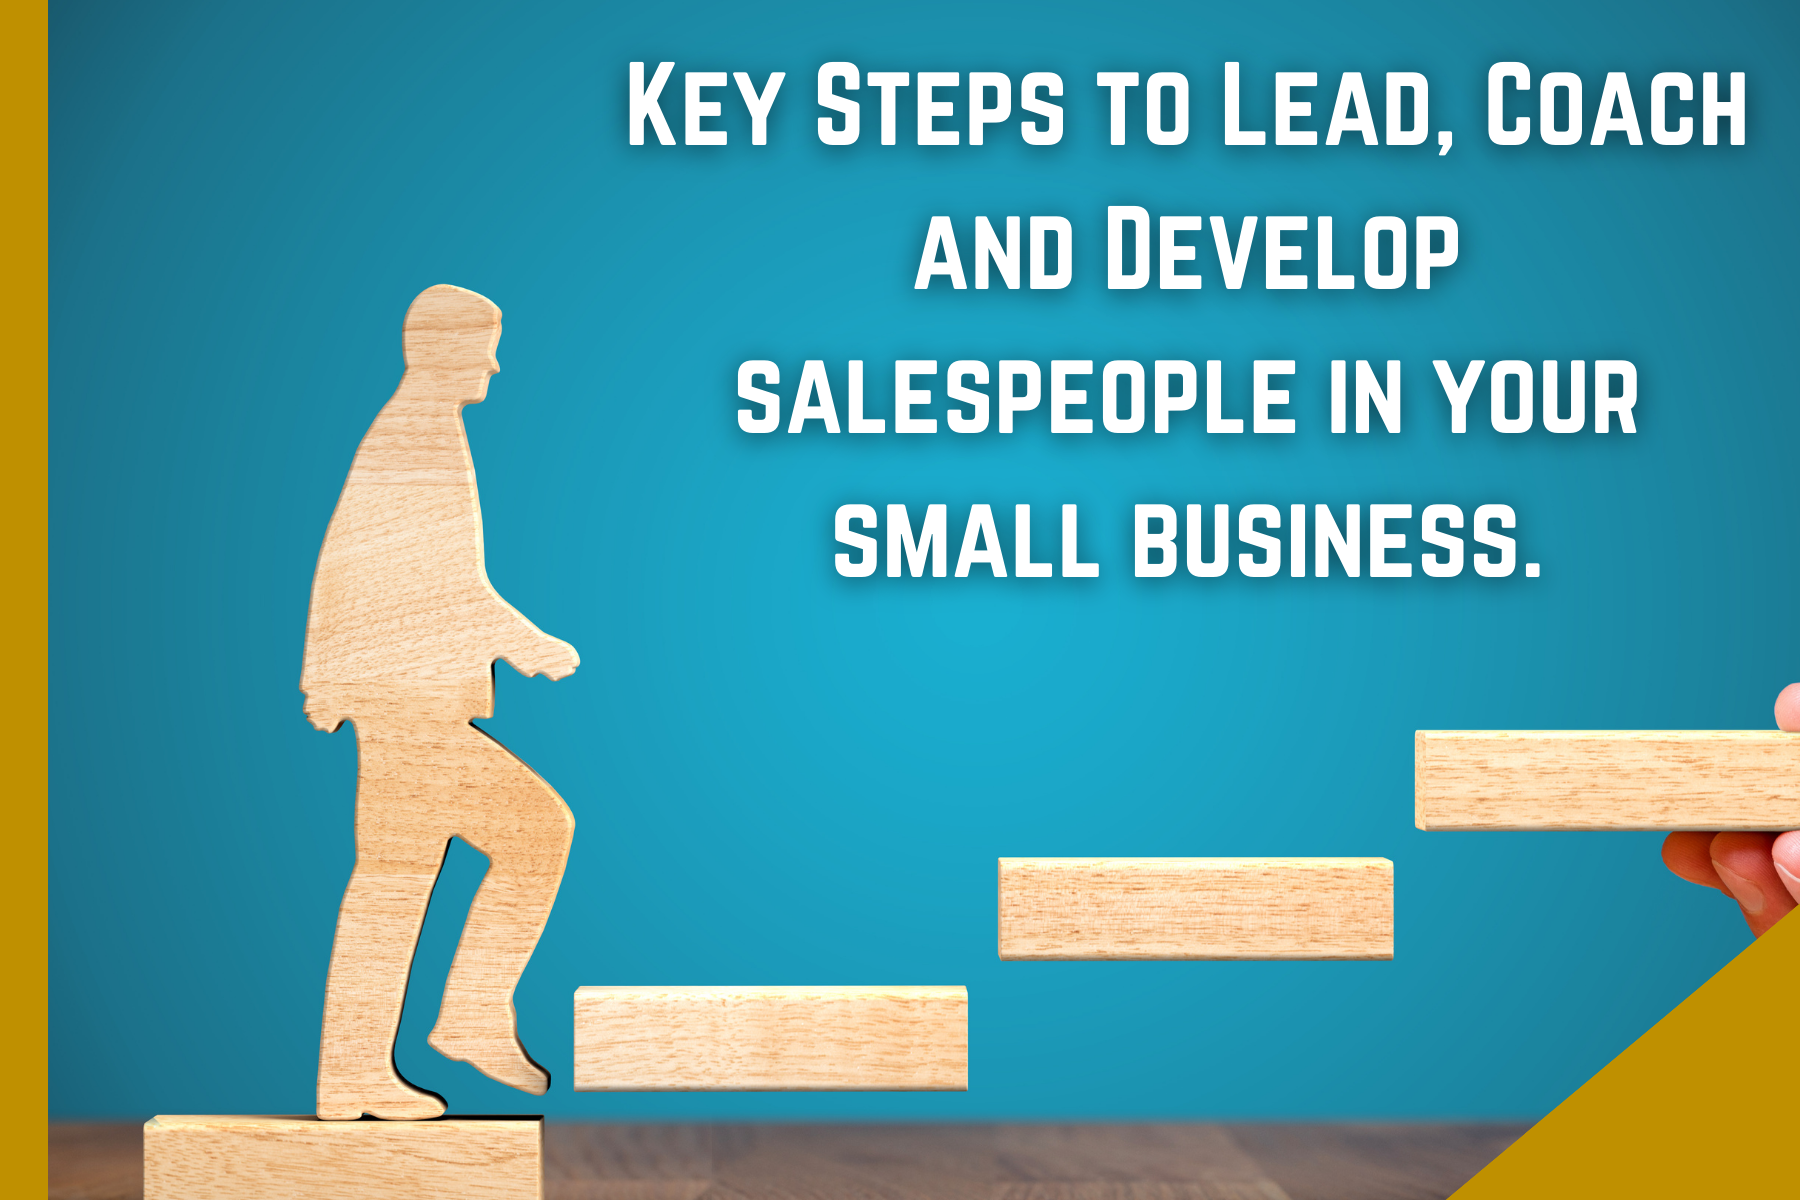 Key Steps to Lead, Coach and Develop salespeople in your small business